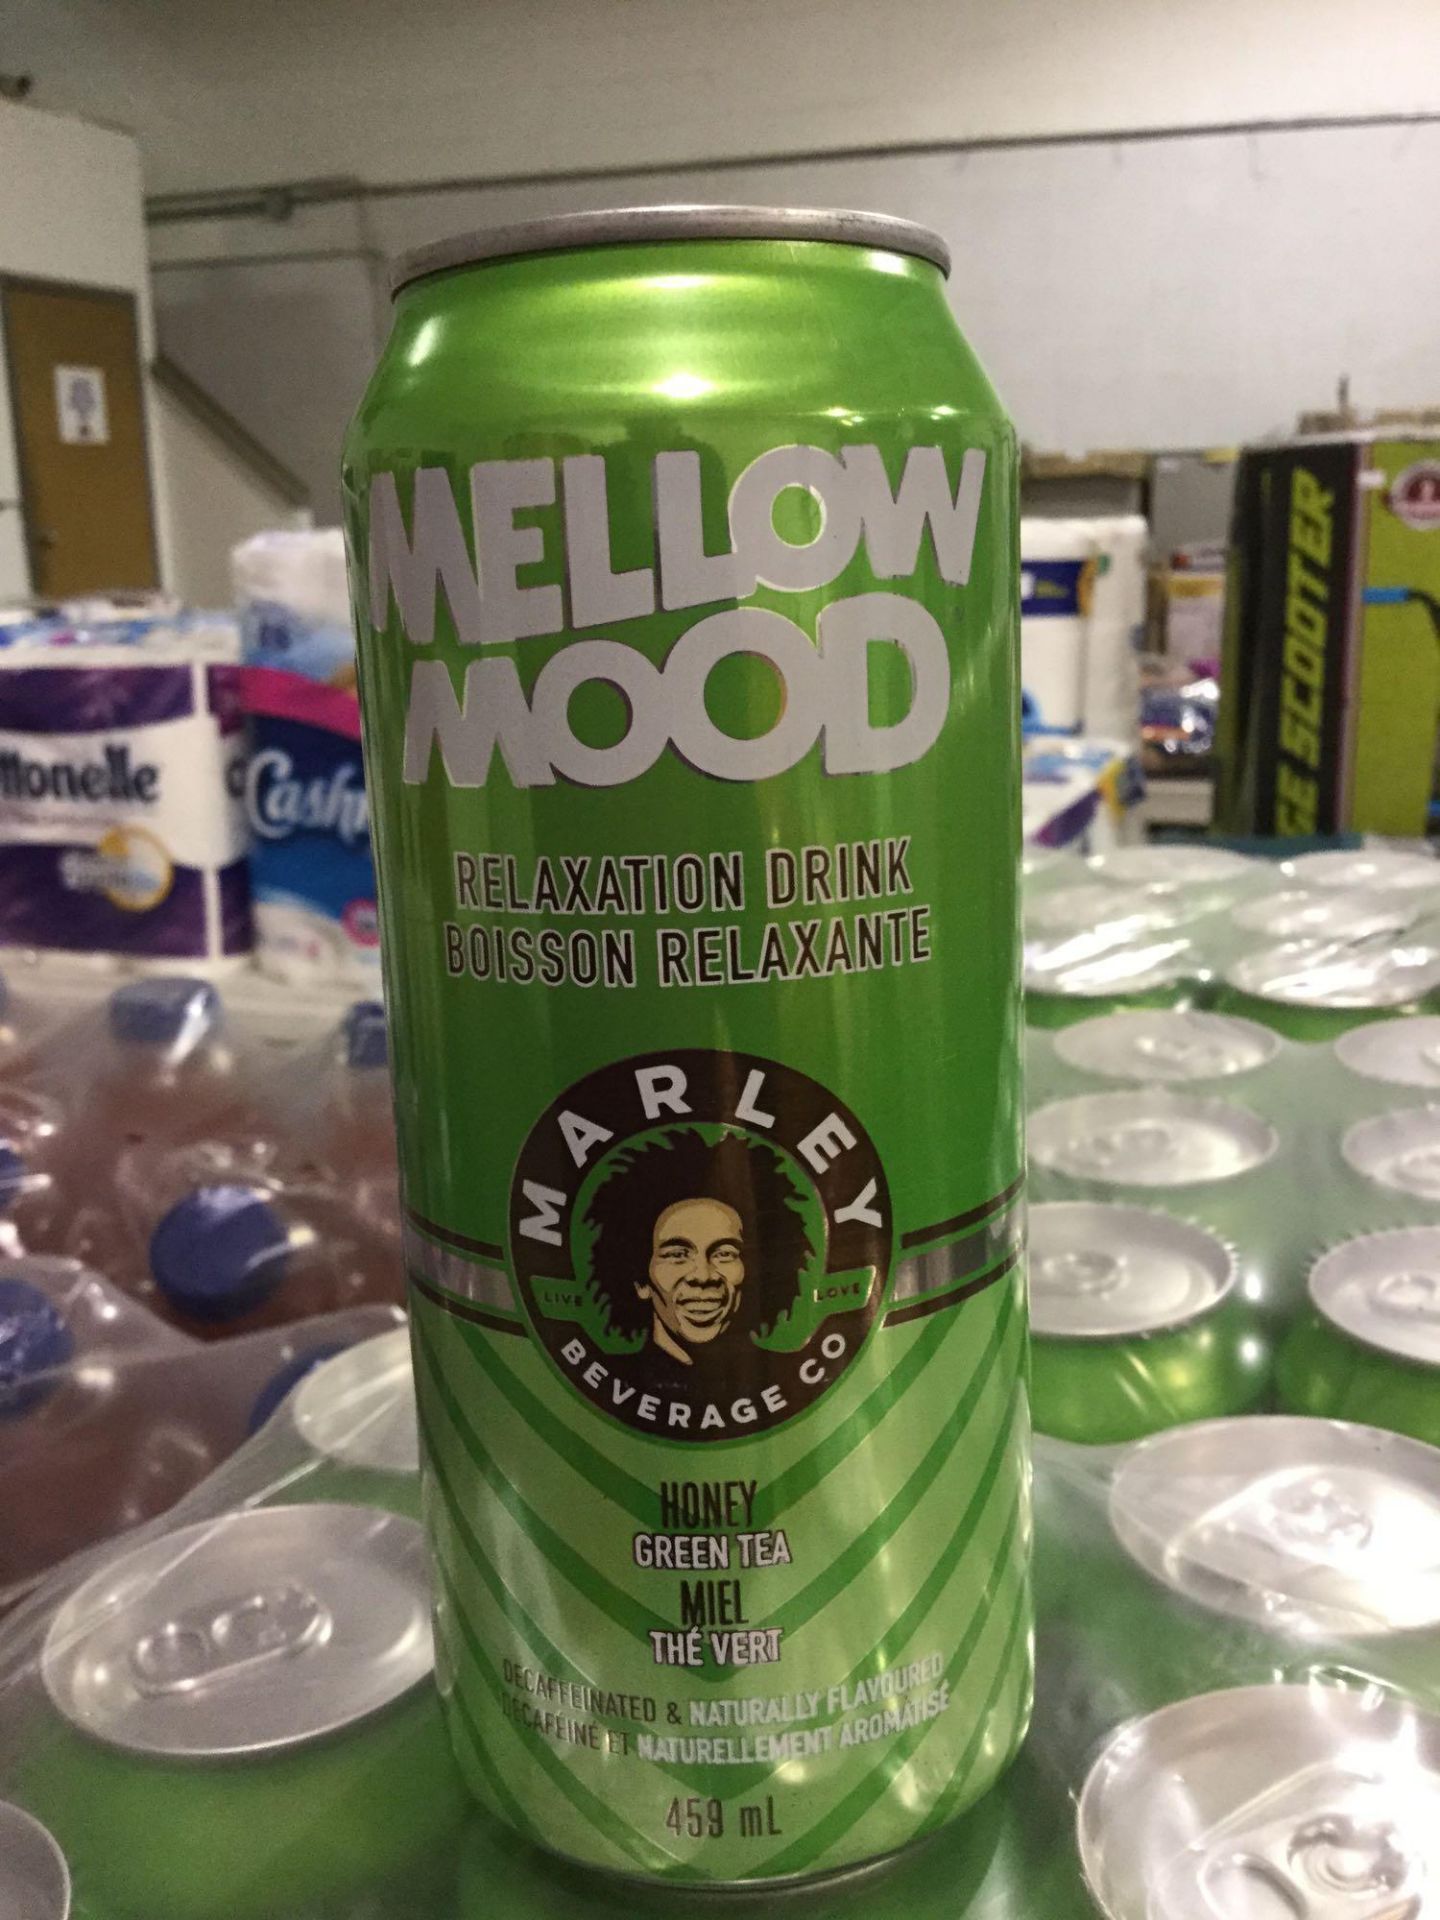 Case of 12 x 459 mL Mellow Mood Relaxation Drink - Marley Beverage Co. - Honey Green Tea - Image 2 of 2